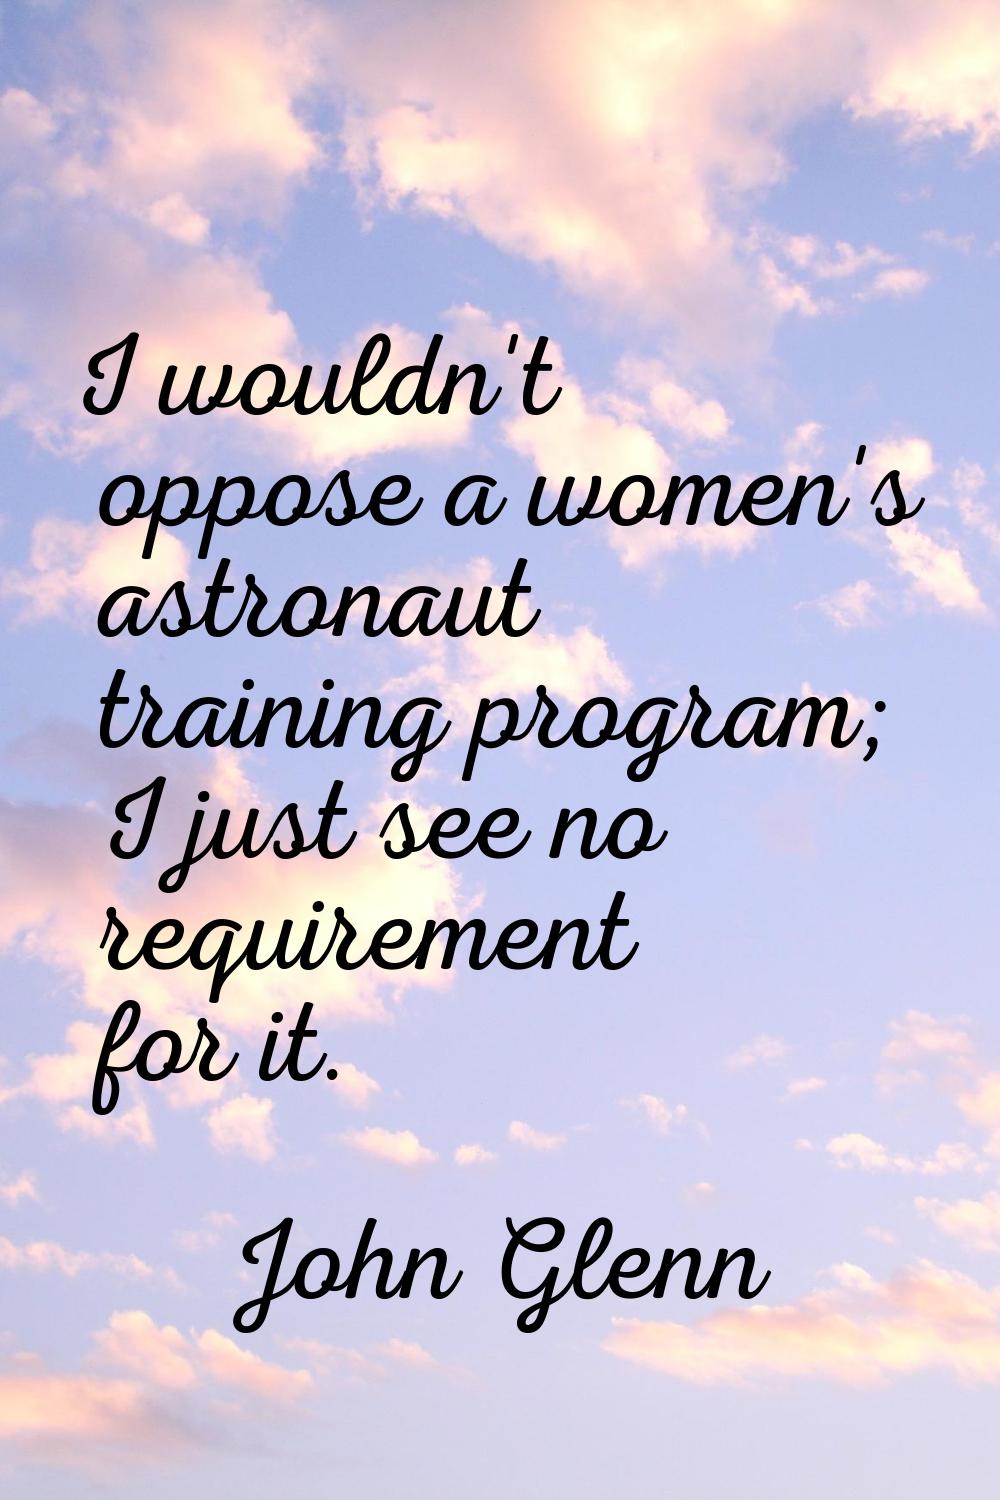 I wouldn't oppose a women's astronaut training program; I just see no requirement for it.